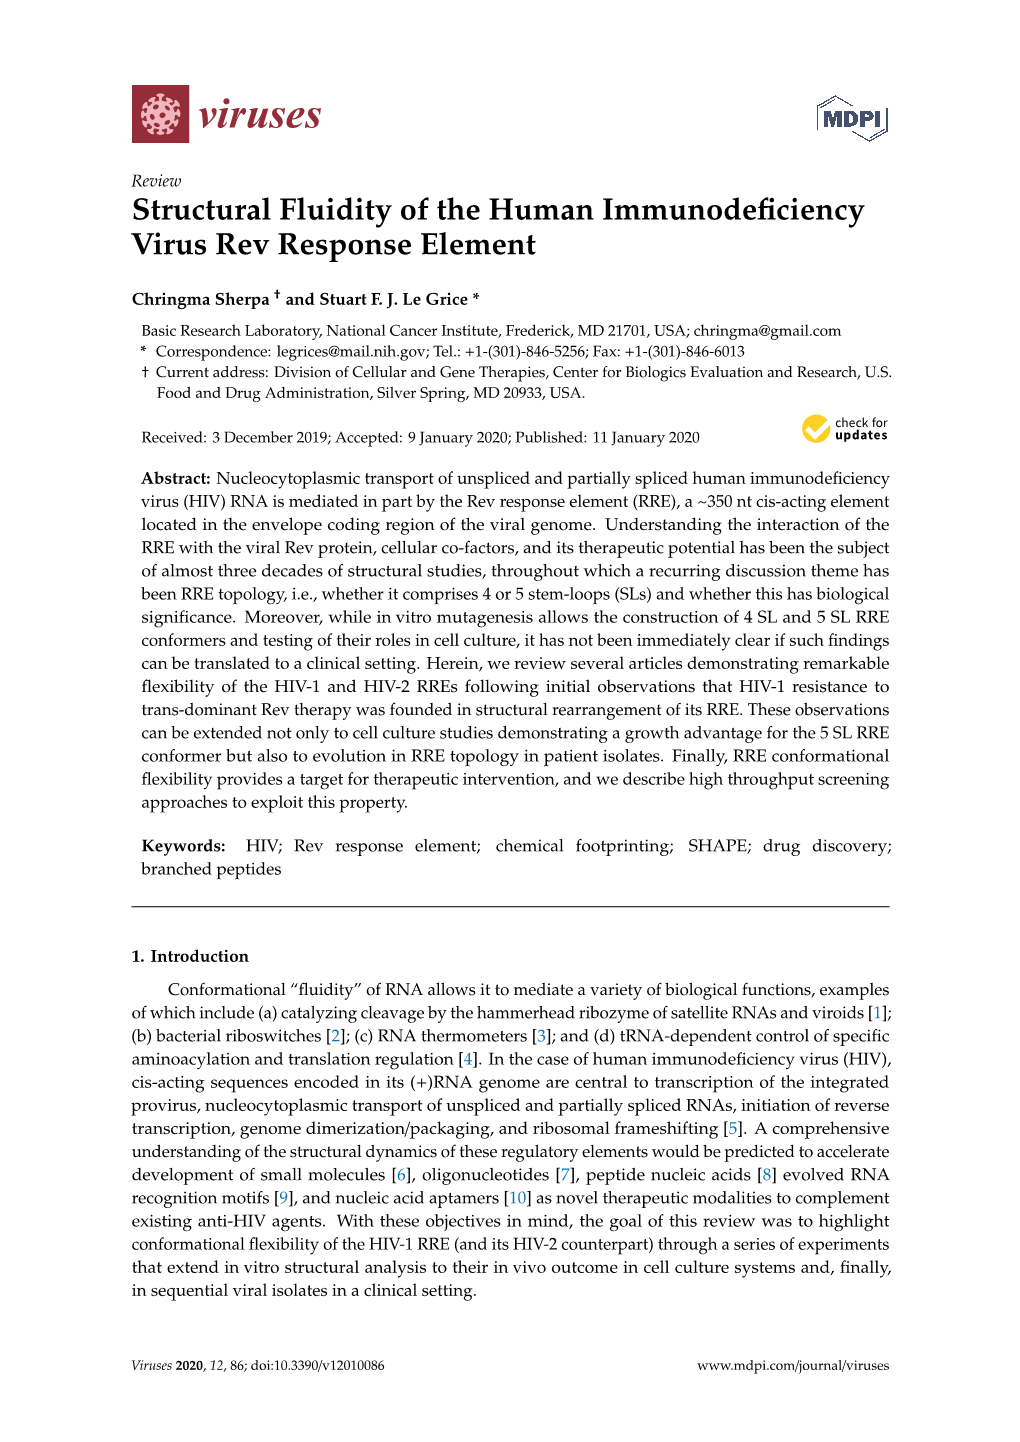 Structural Fluidity of the Human Immunodeficiency Virus Rev